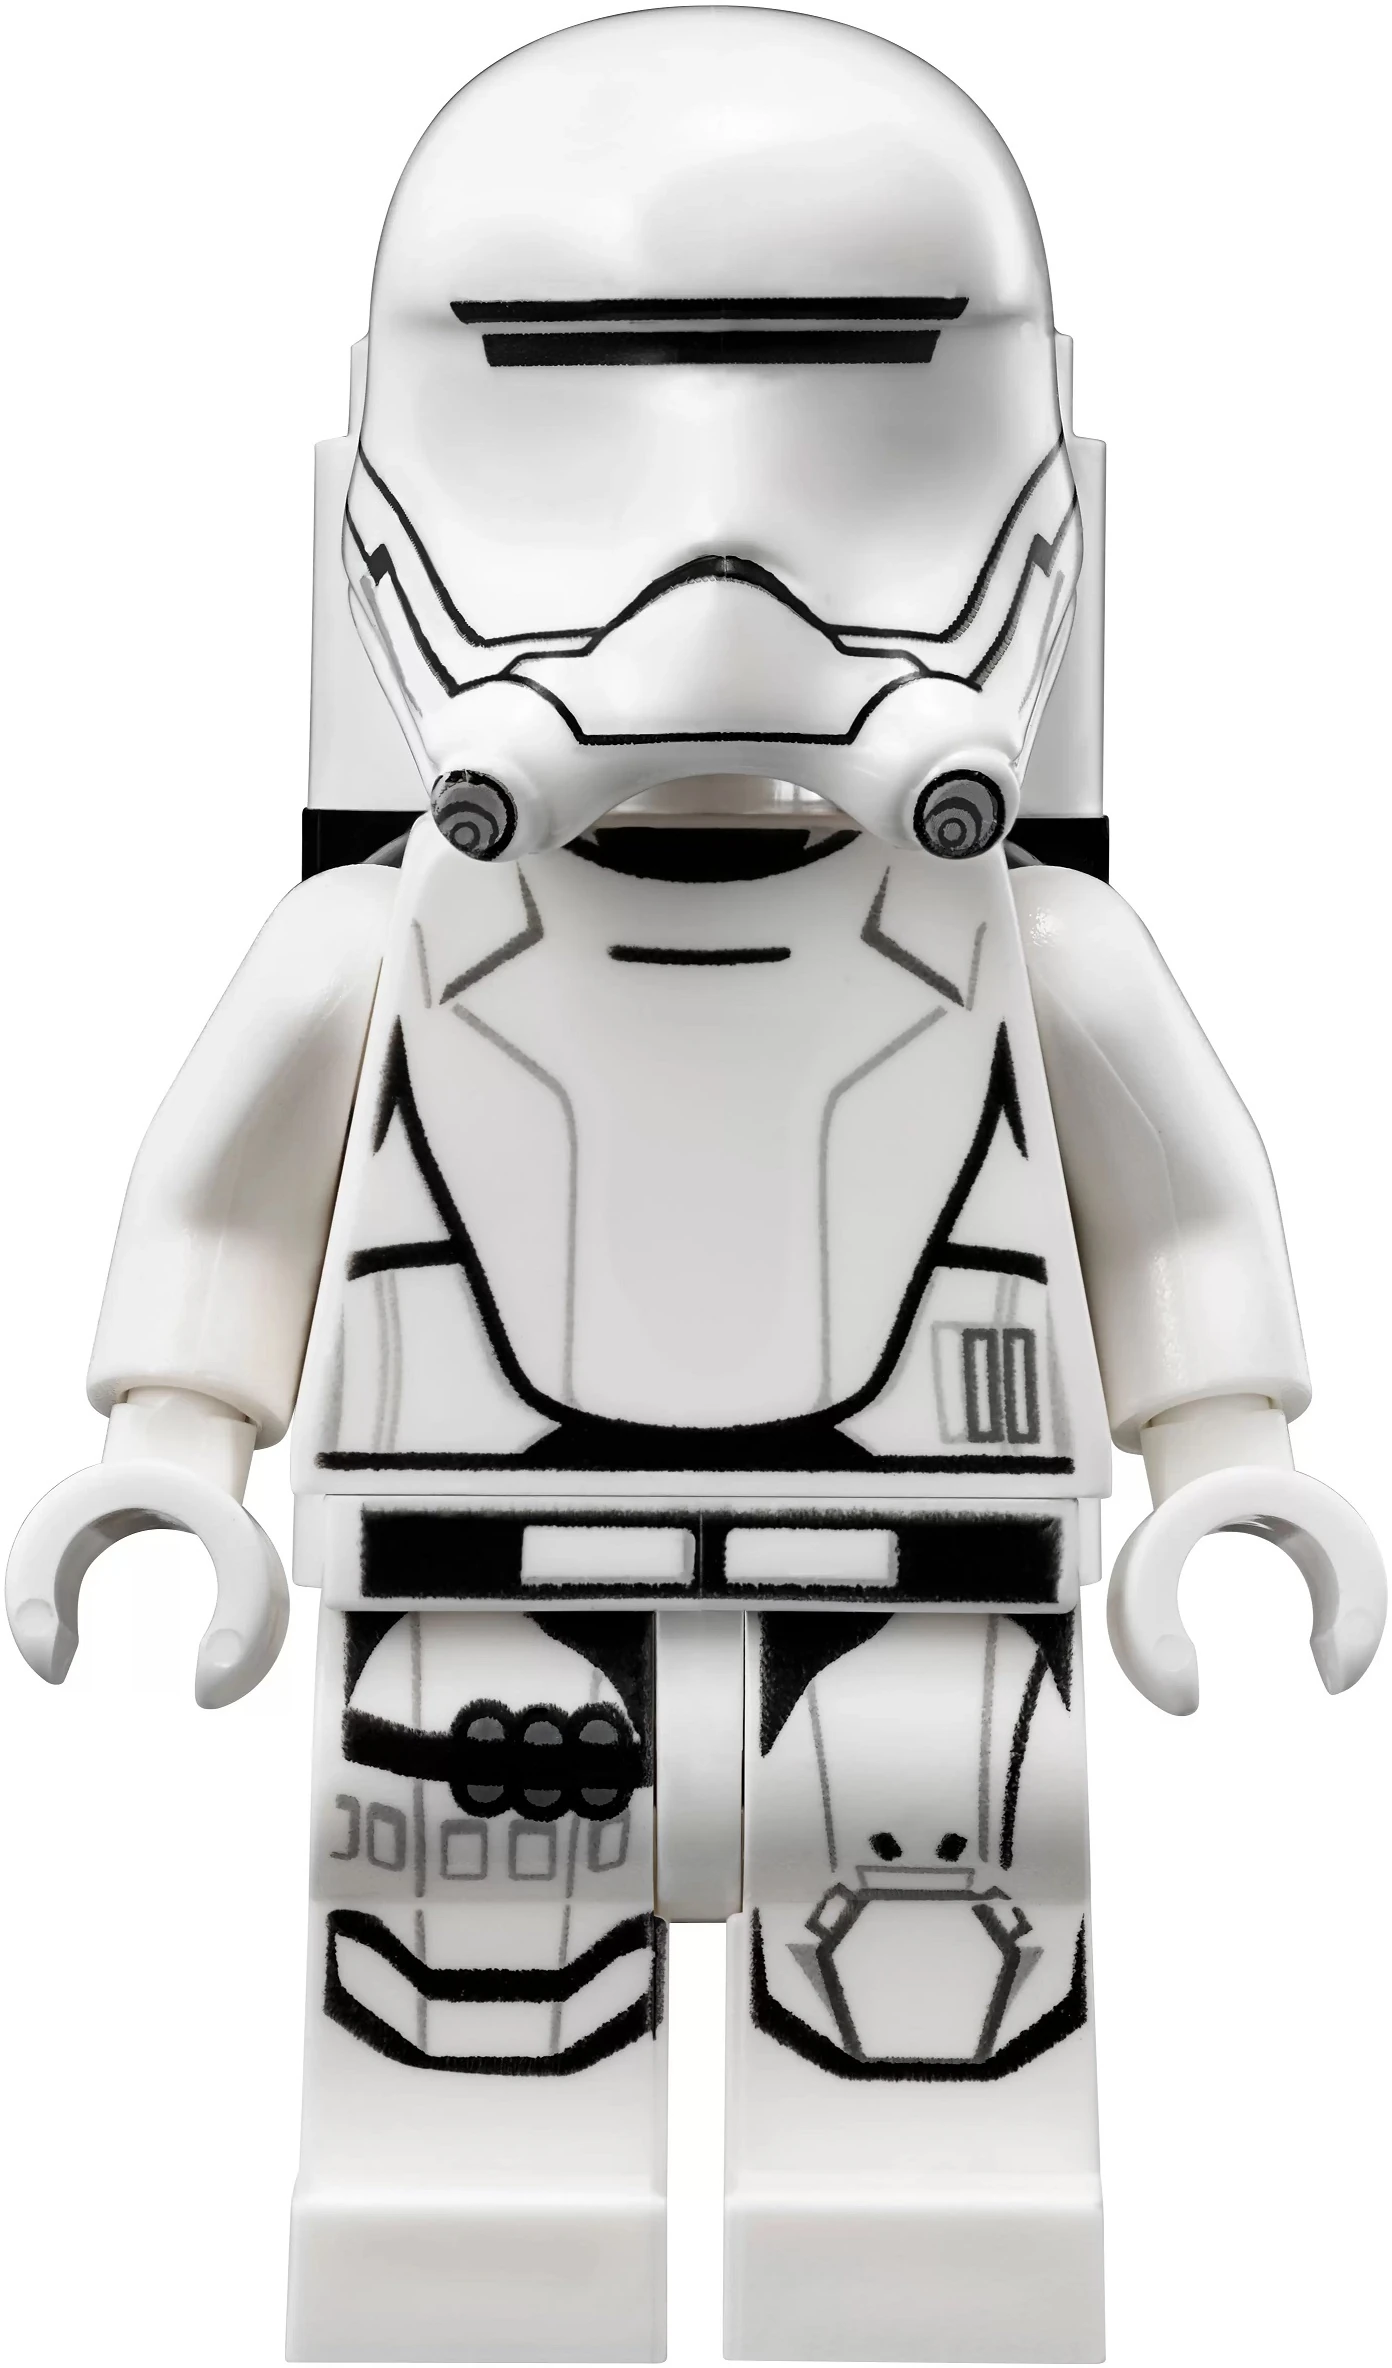 LEGO Star Wars Force Awakens First Order Stormtrooper Minifigure from blister 